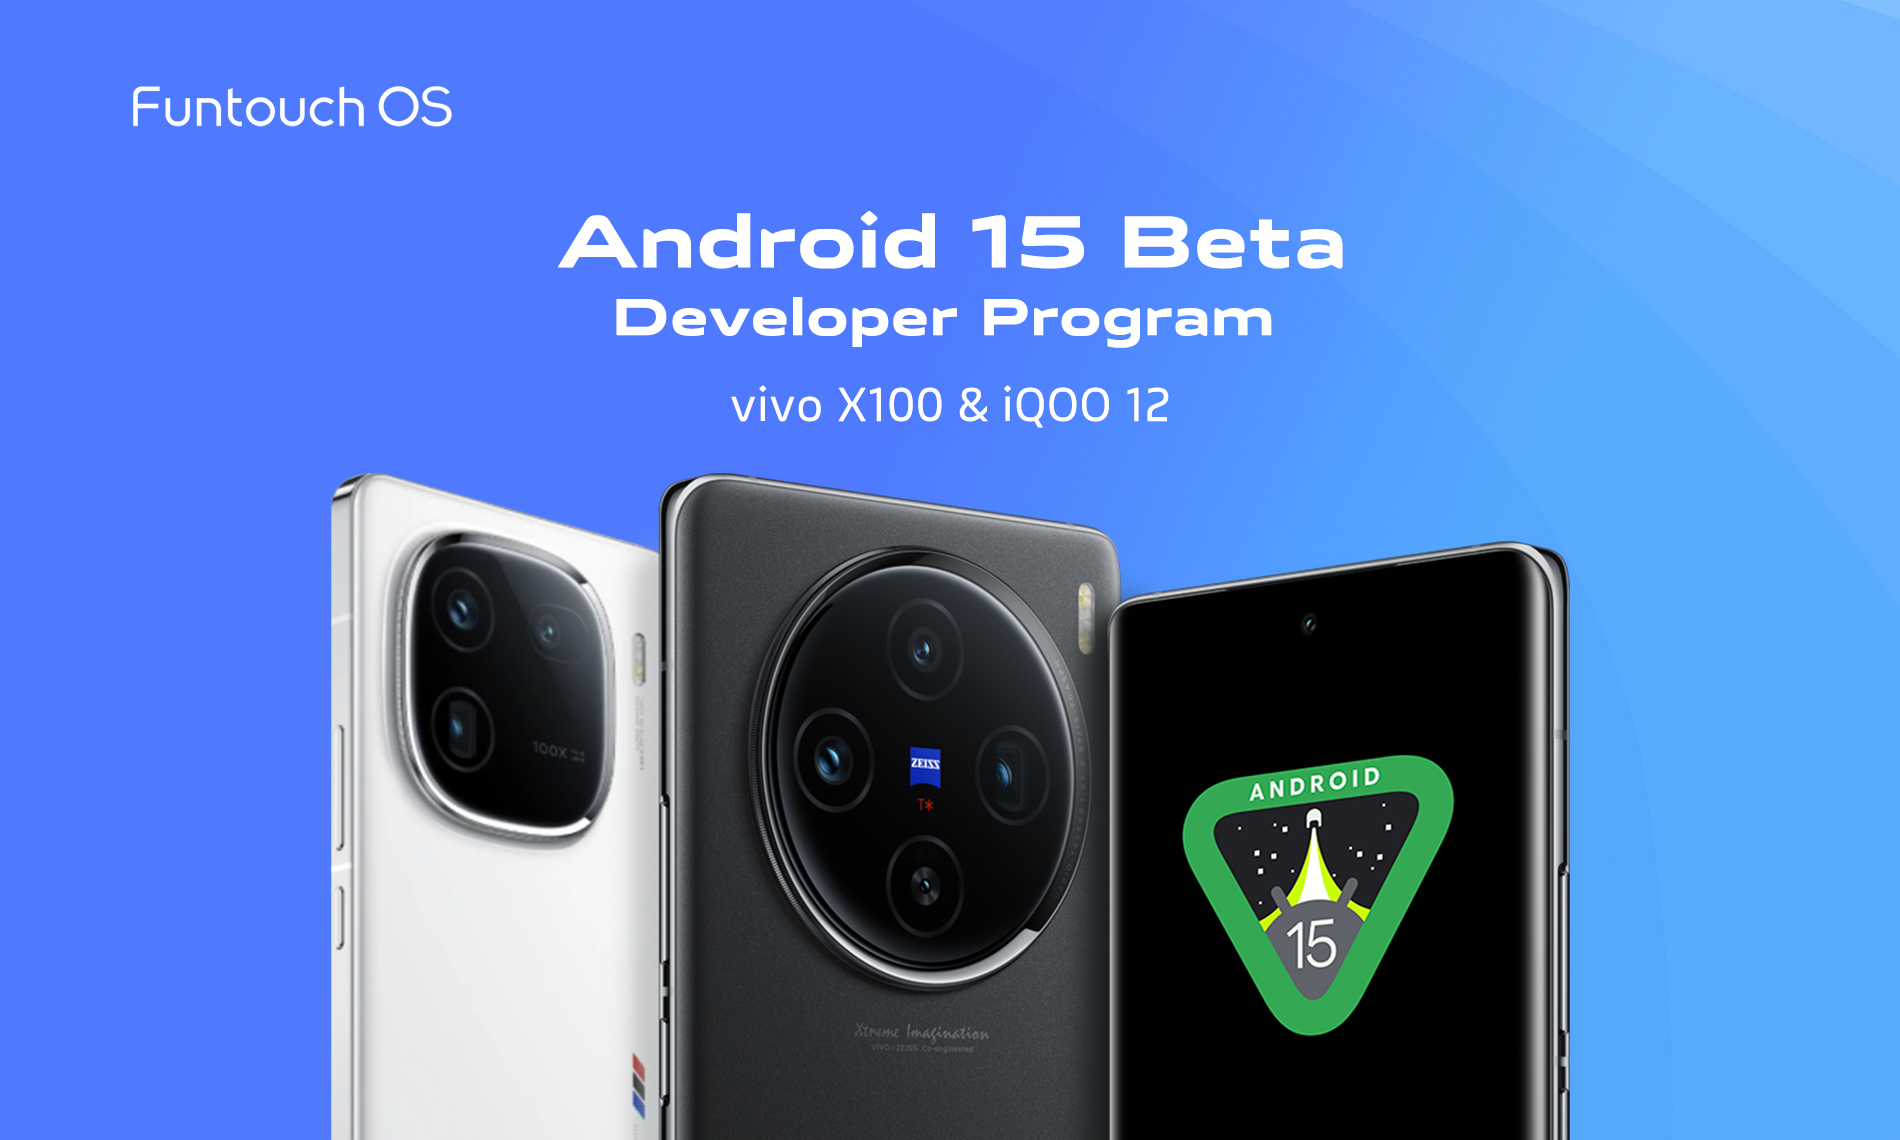 vivo Announces Android 15 Beta Program for Developers on X100 and iQOO 12 Smartphones